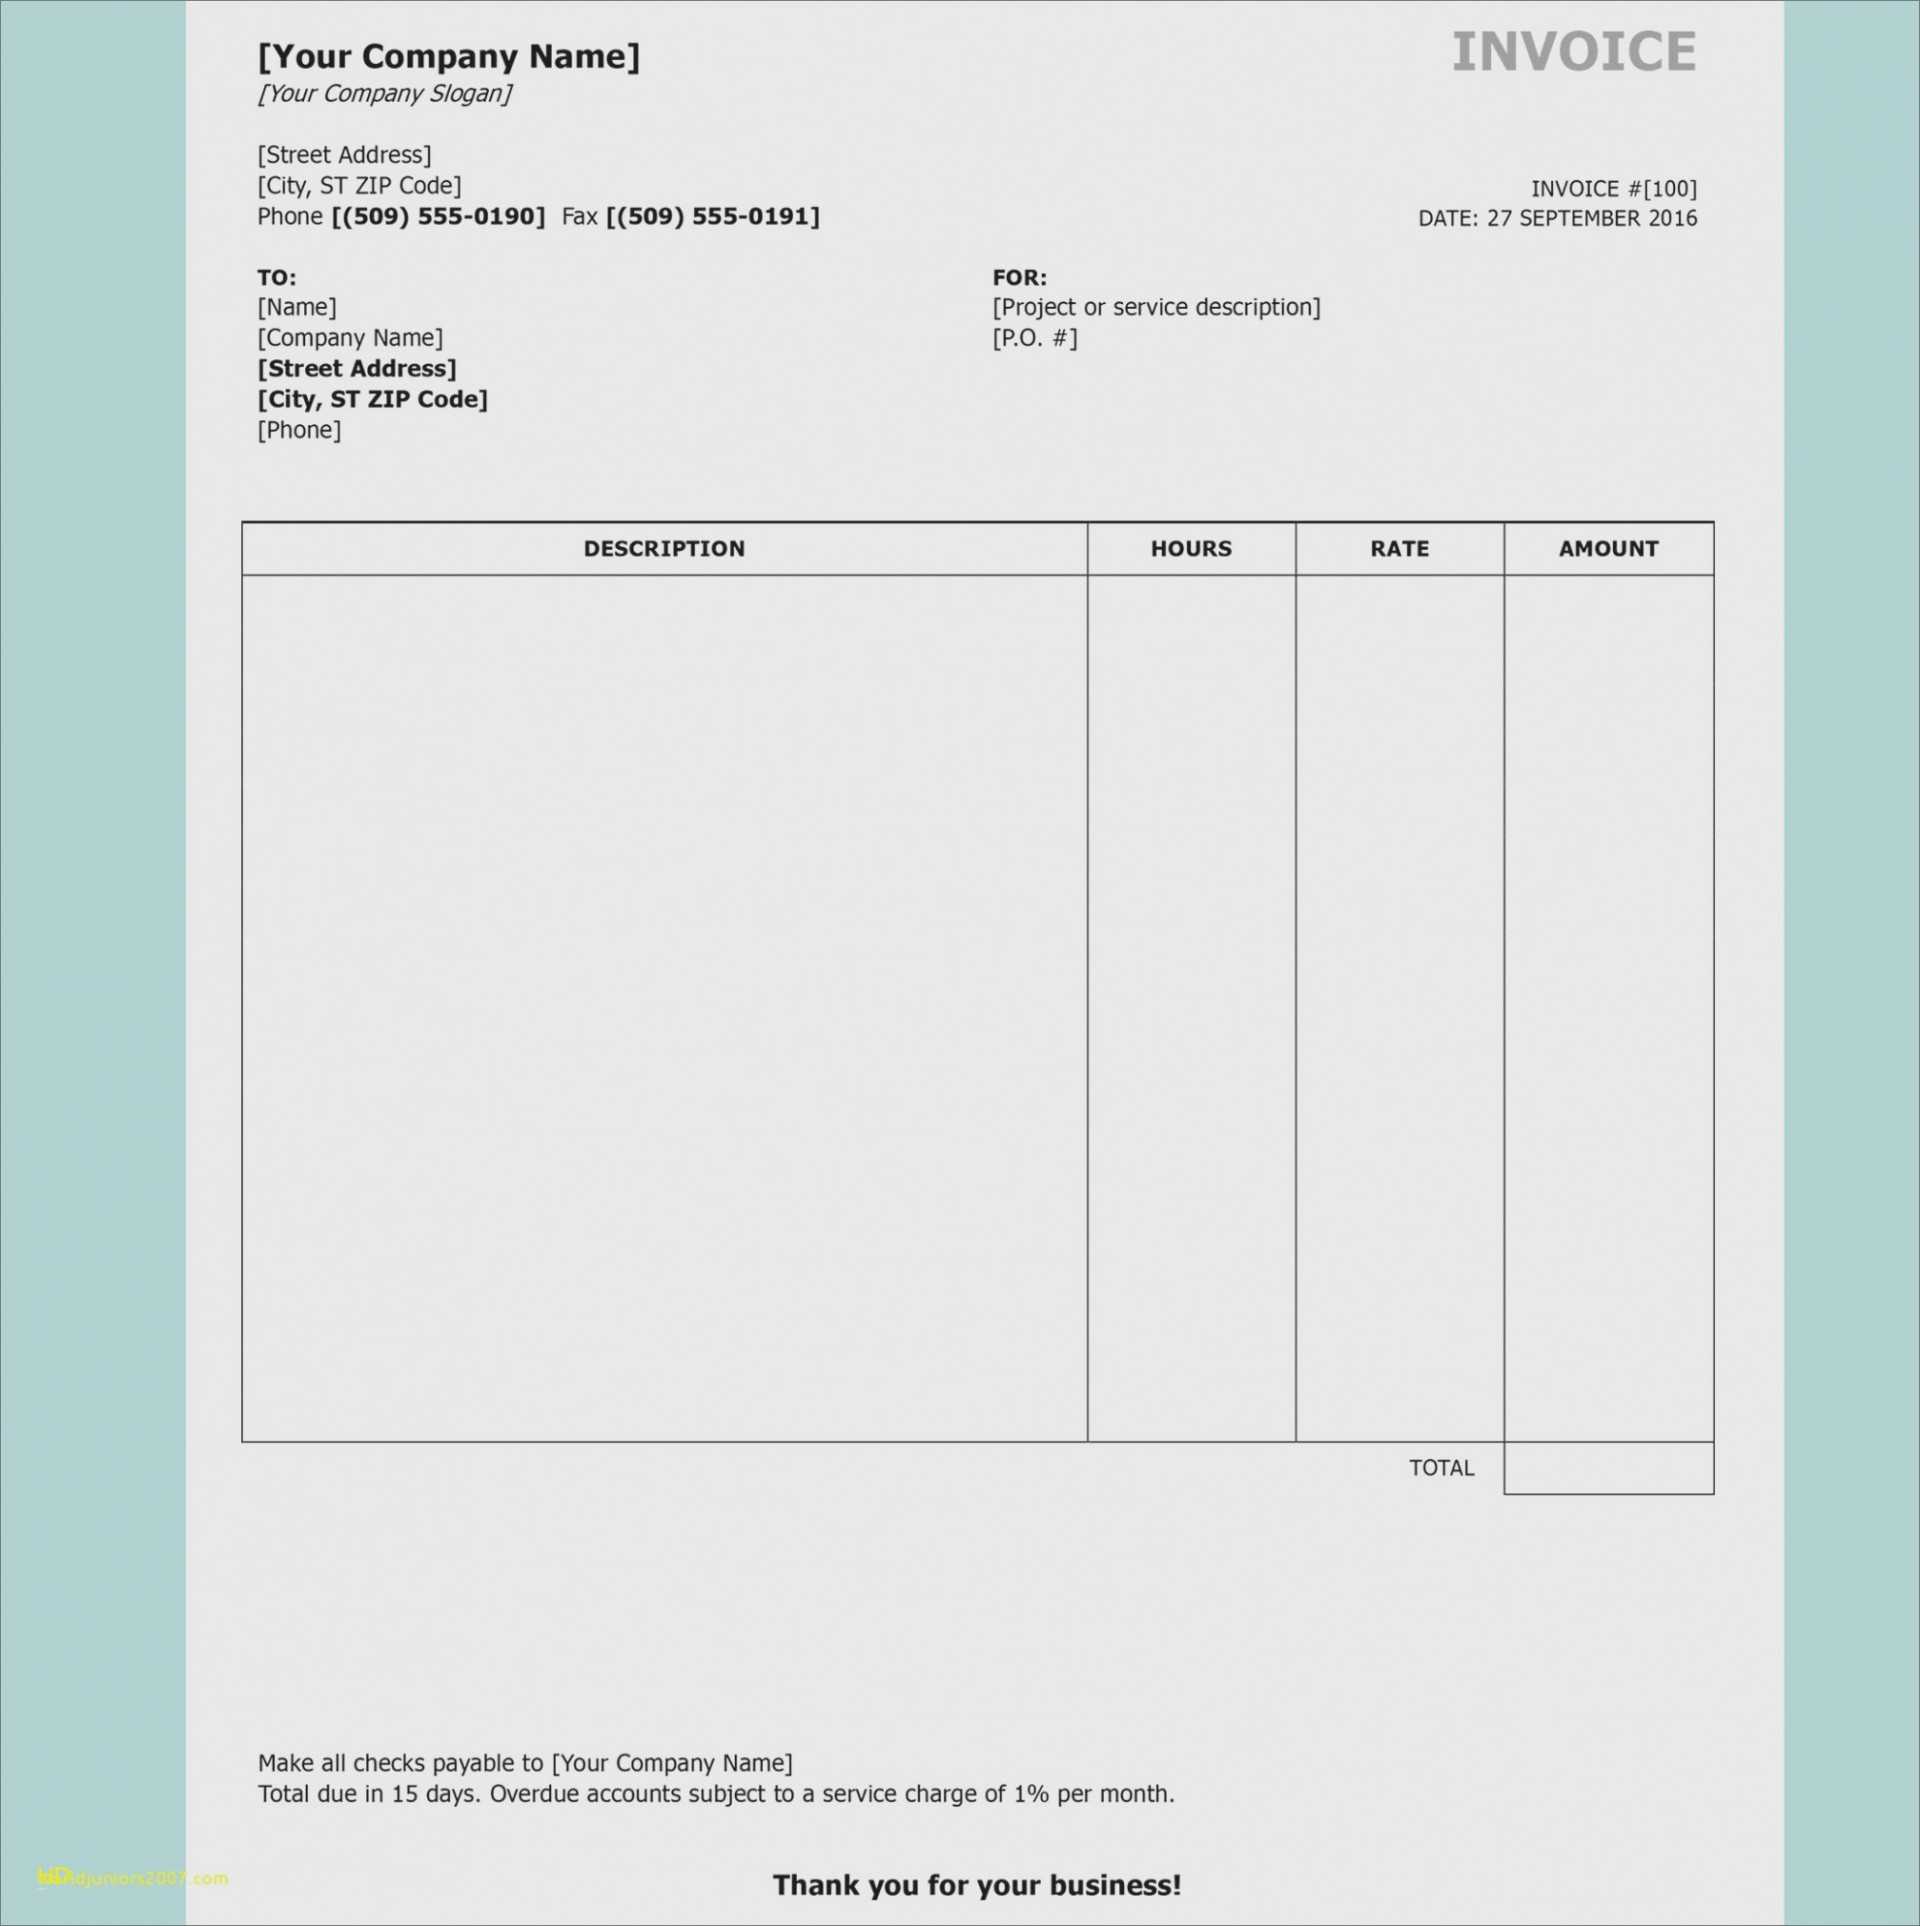 006 Invoice Template Us Cool Waves 750Px Ideas Free Singular Regarding Free Downloadable Invoice Template